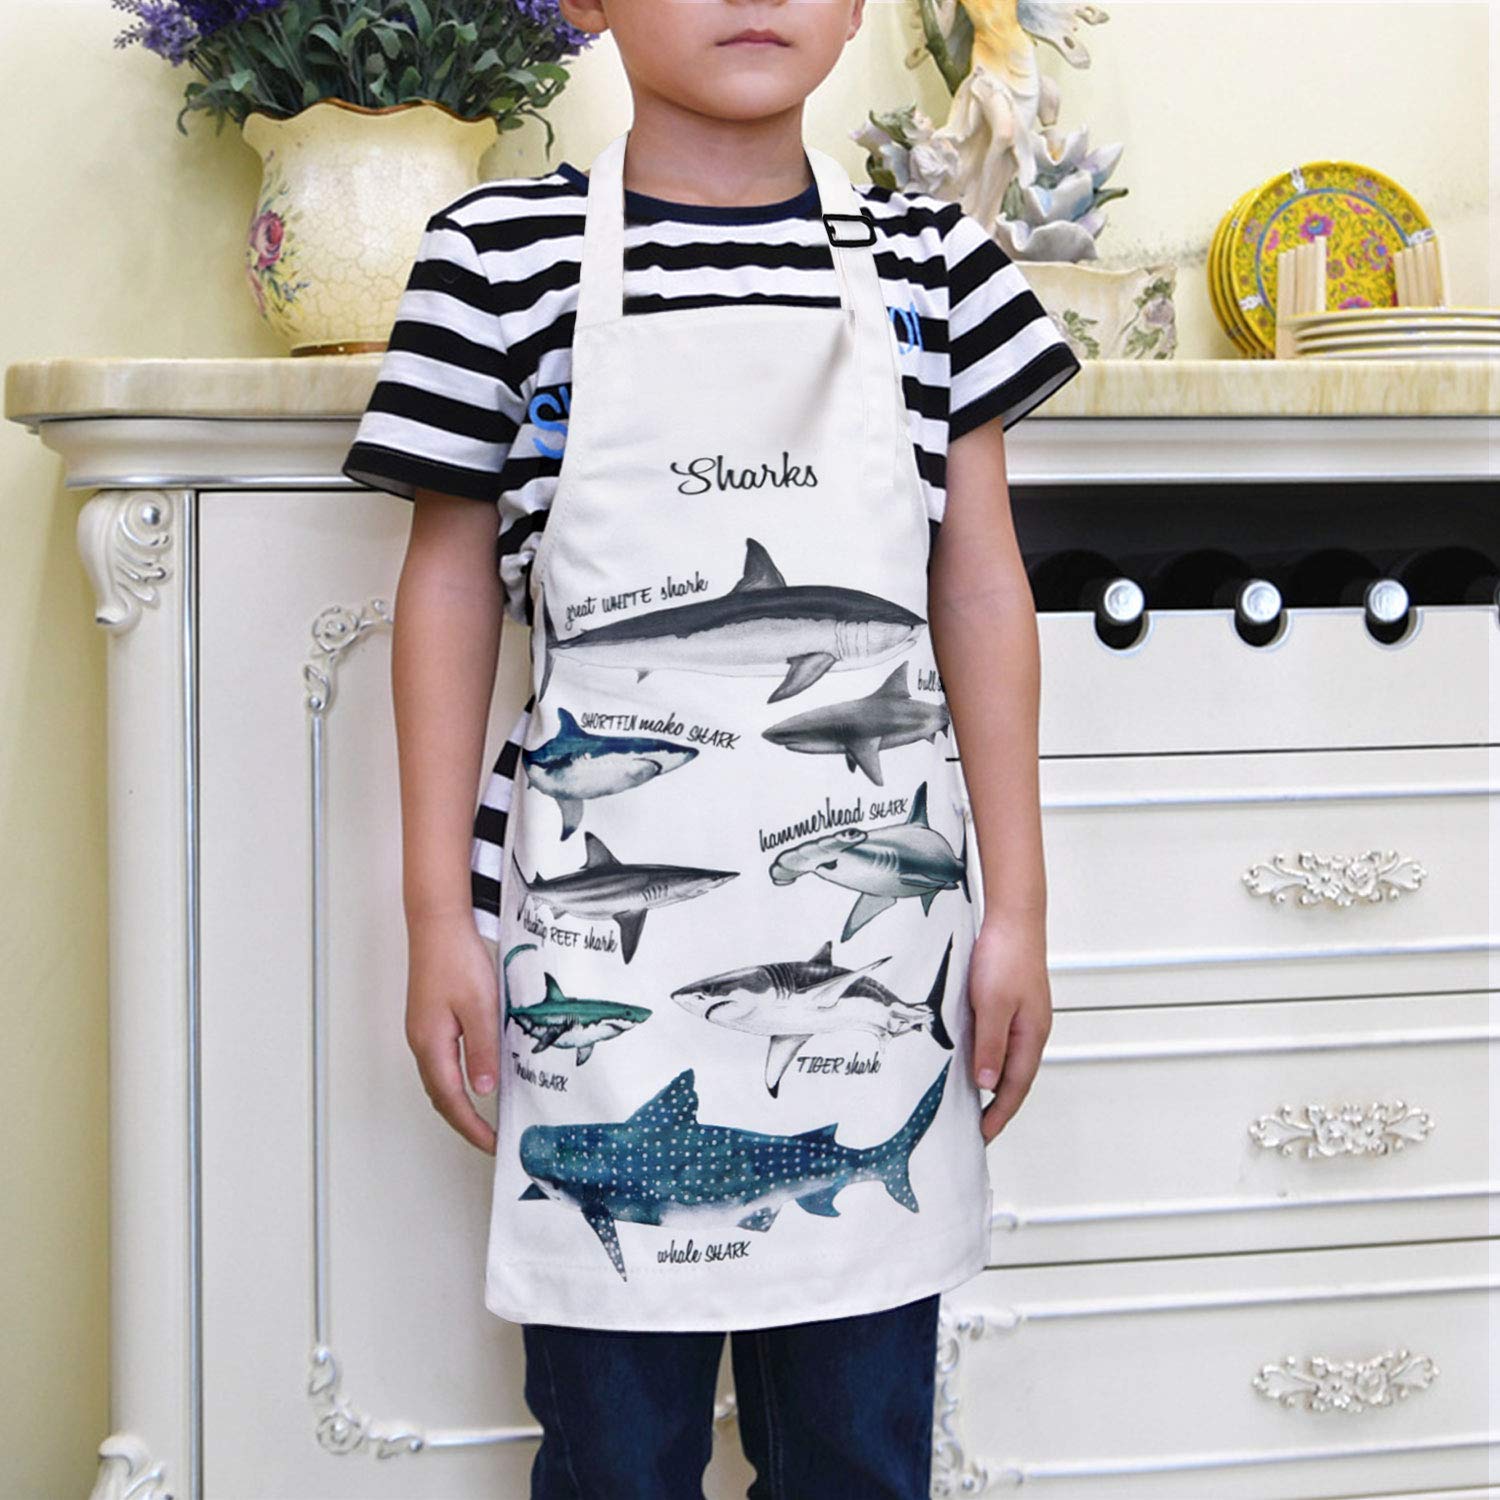 Claswcalor Sharks Apron- Kids Baking Apron-Waterproof Child Apron with Adjustable Neck for Party Cooking Gardening Painting Craft